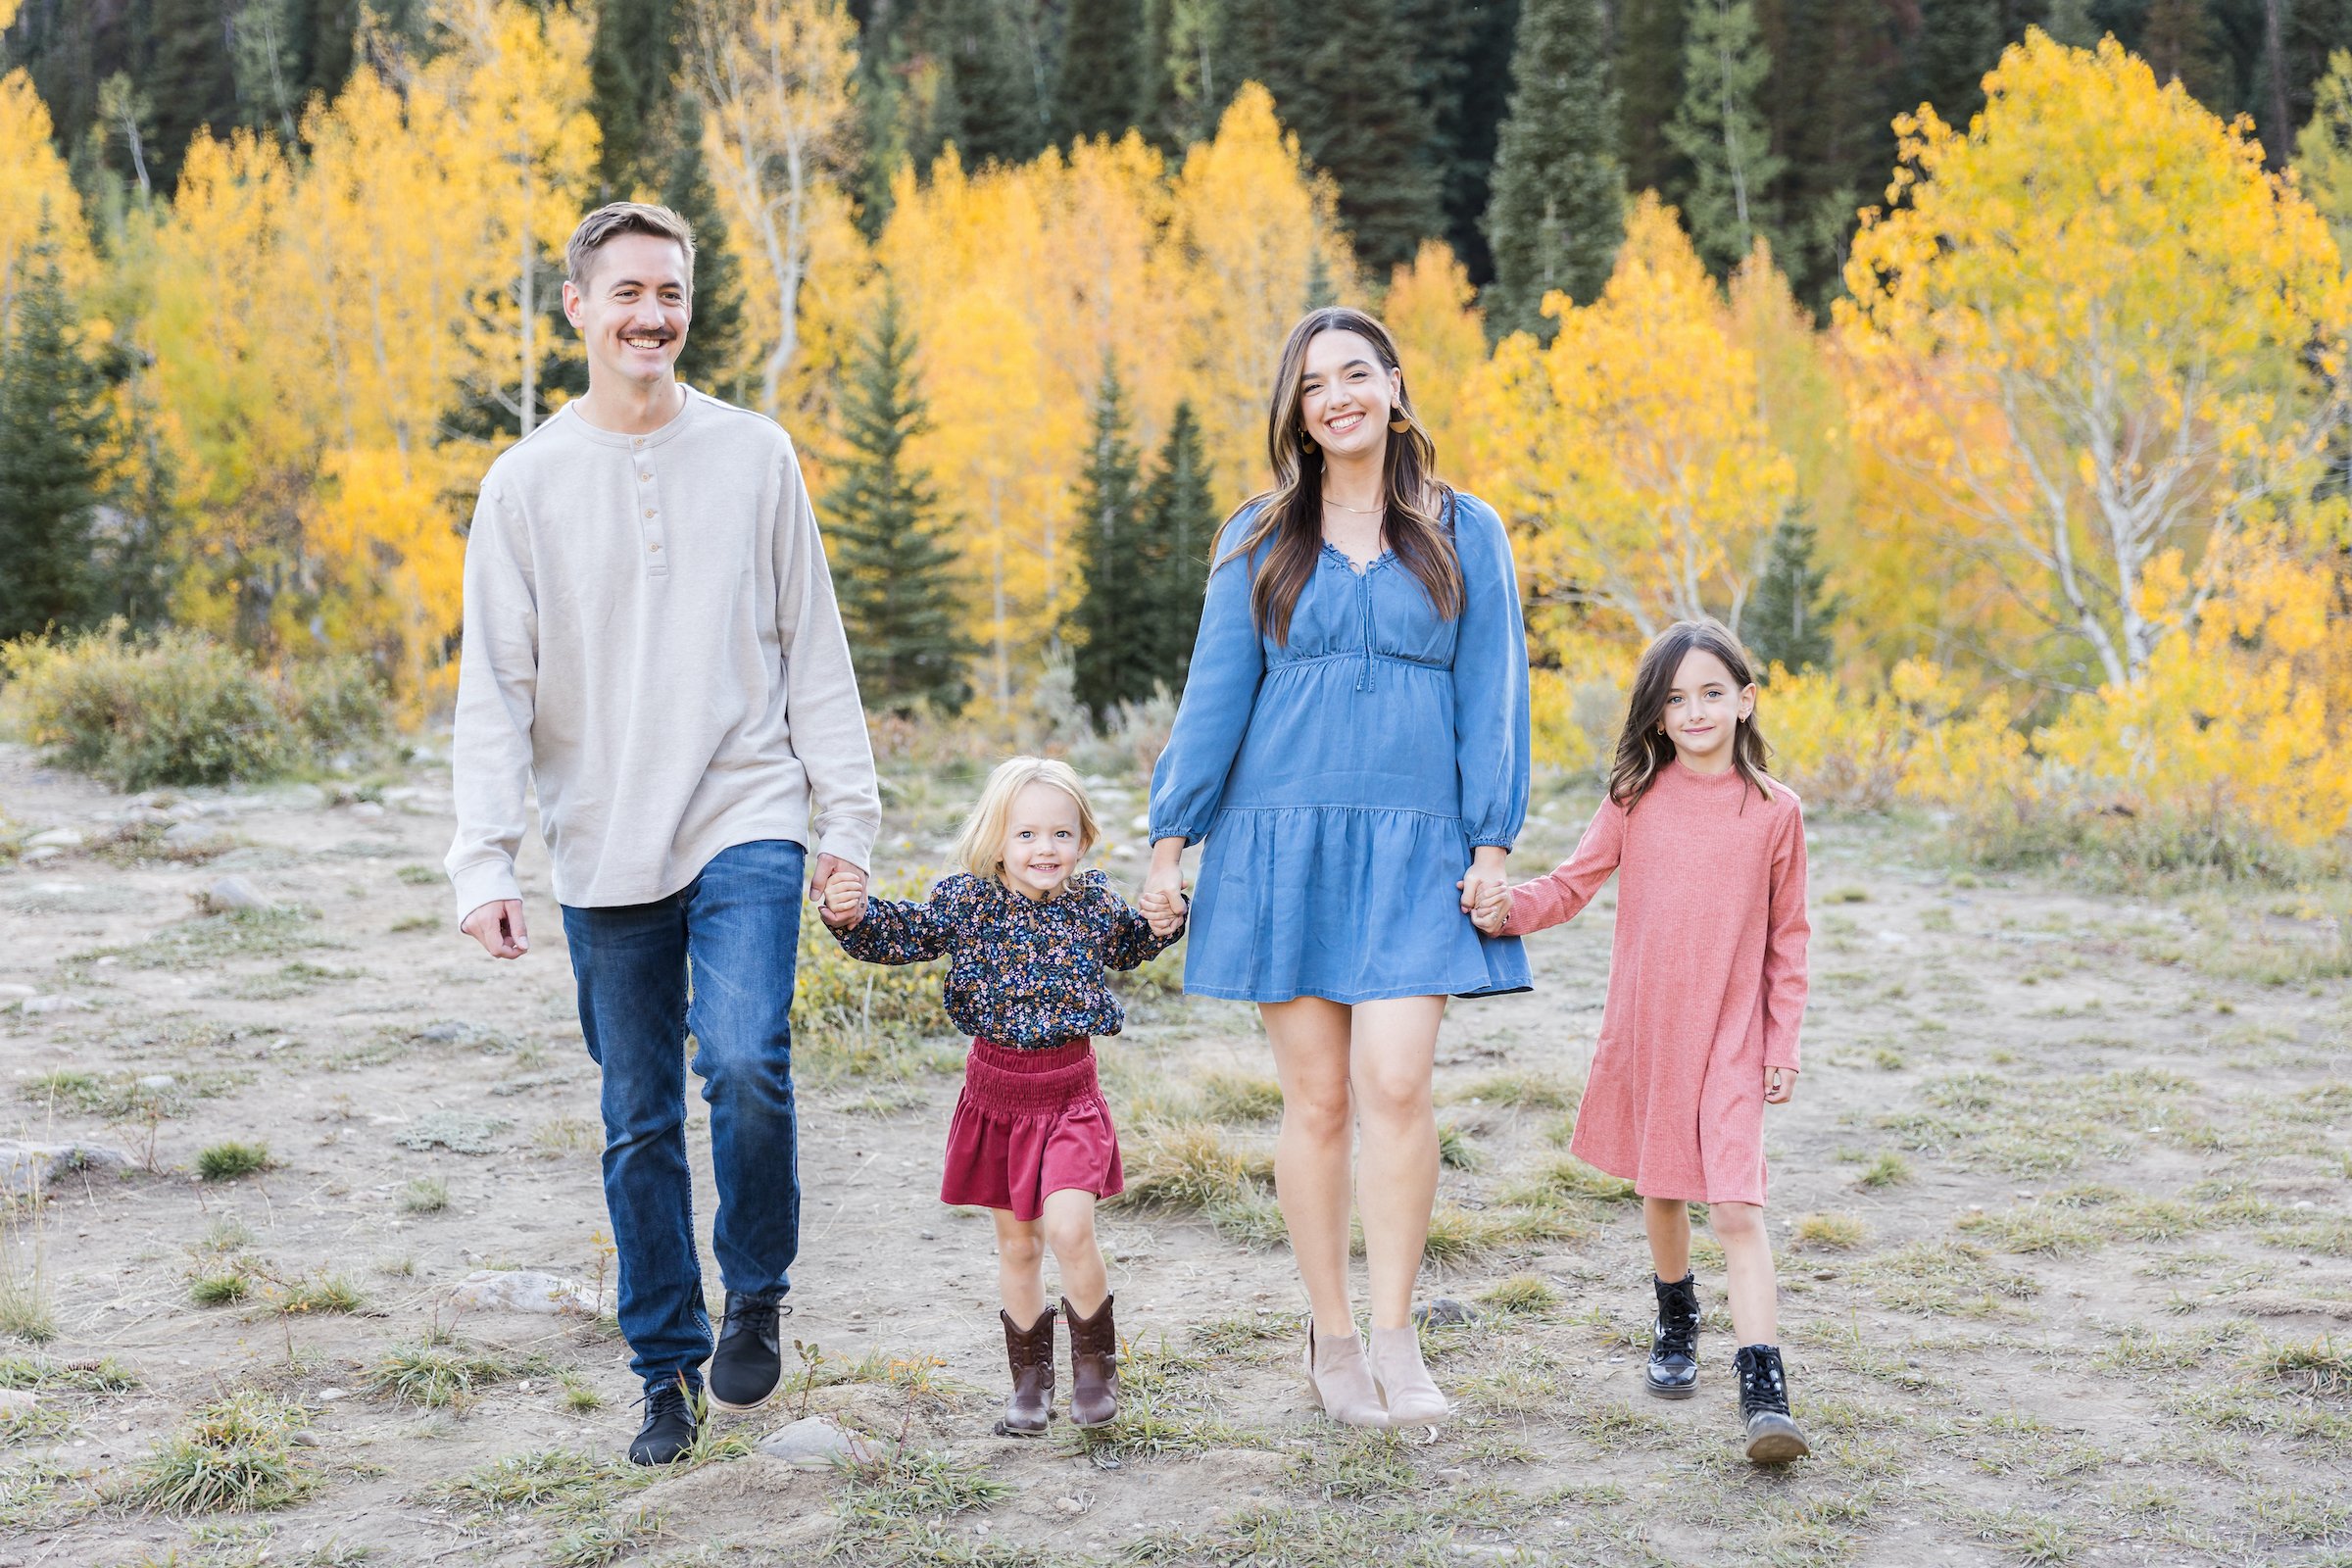 Session in Big Cottonwood Canyon. Beautiful fall colors and gorgeous family photographed by Stephanie Lorraine Photography.